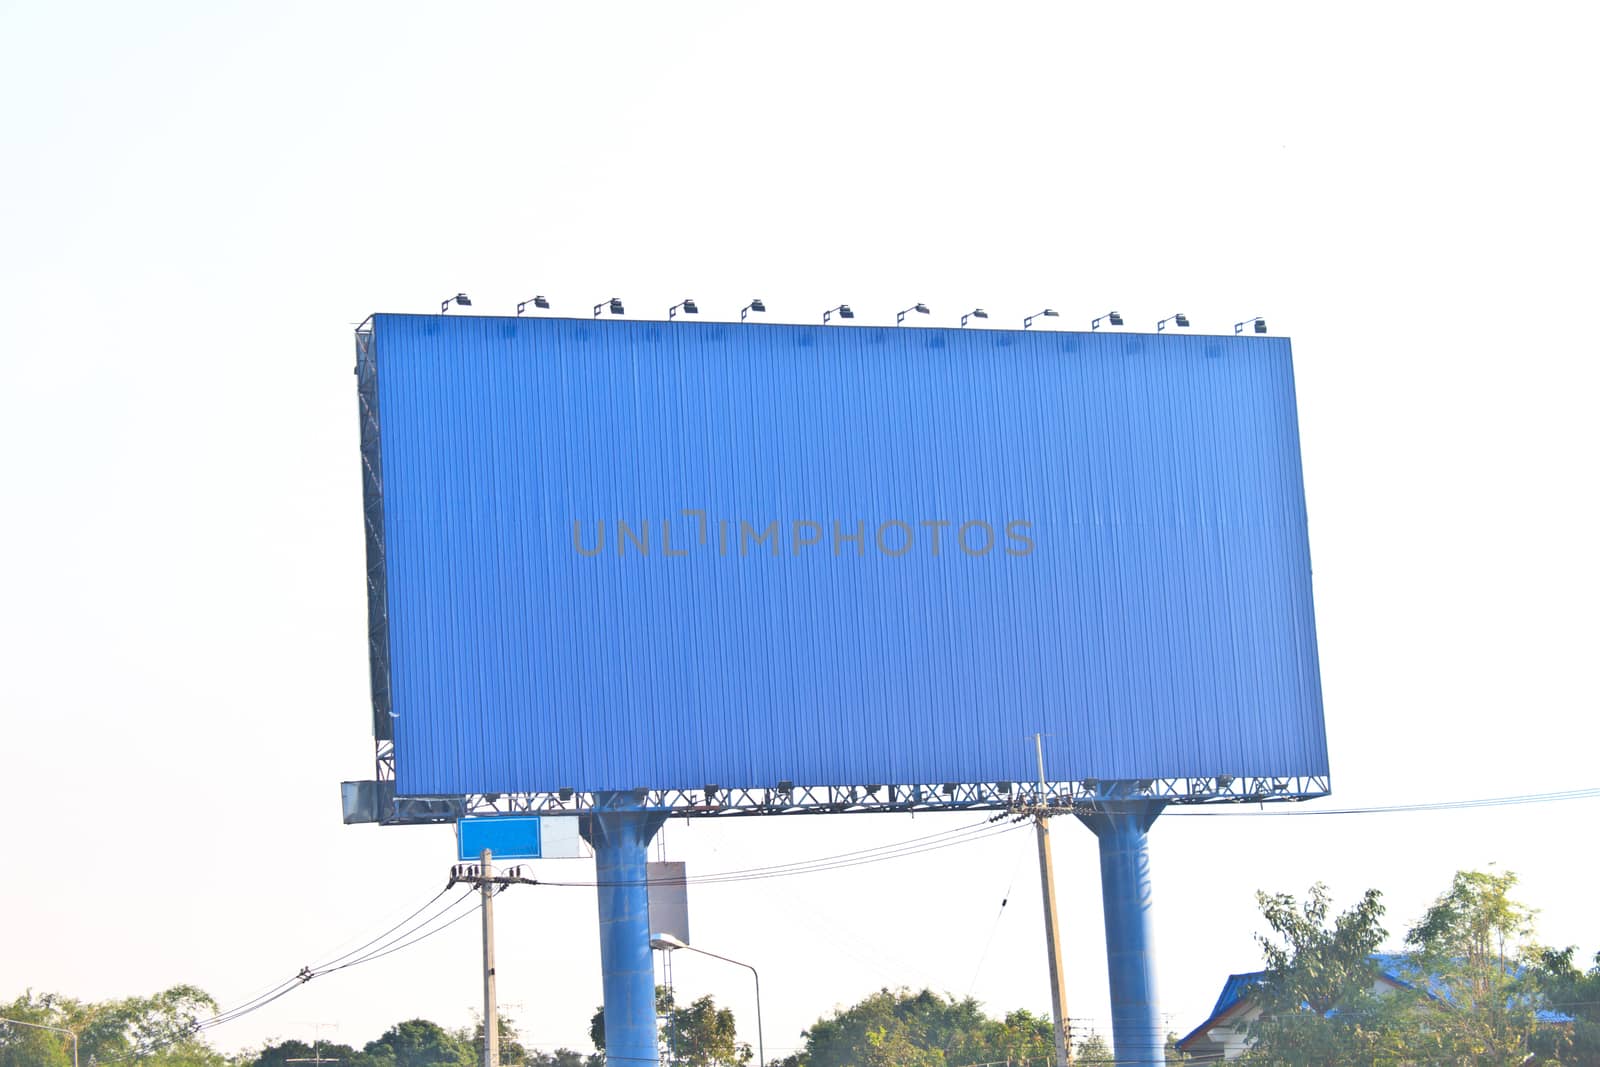 Blank billboard ready used for new advertisement